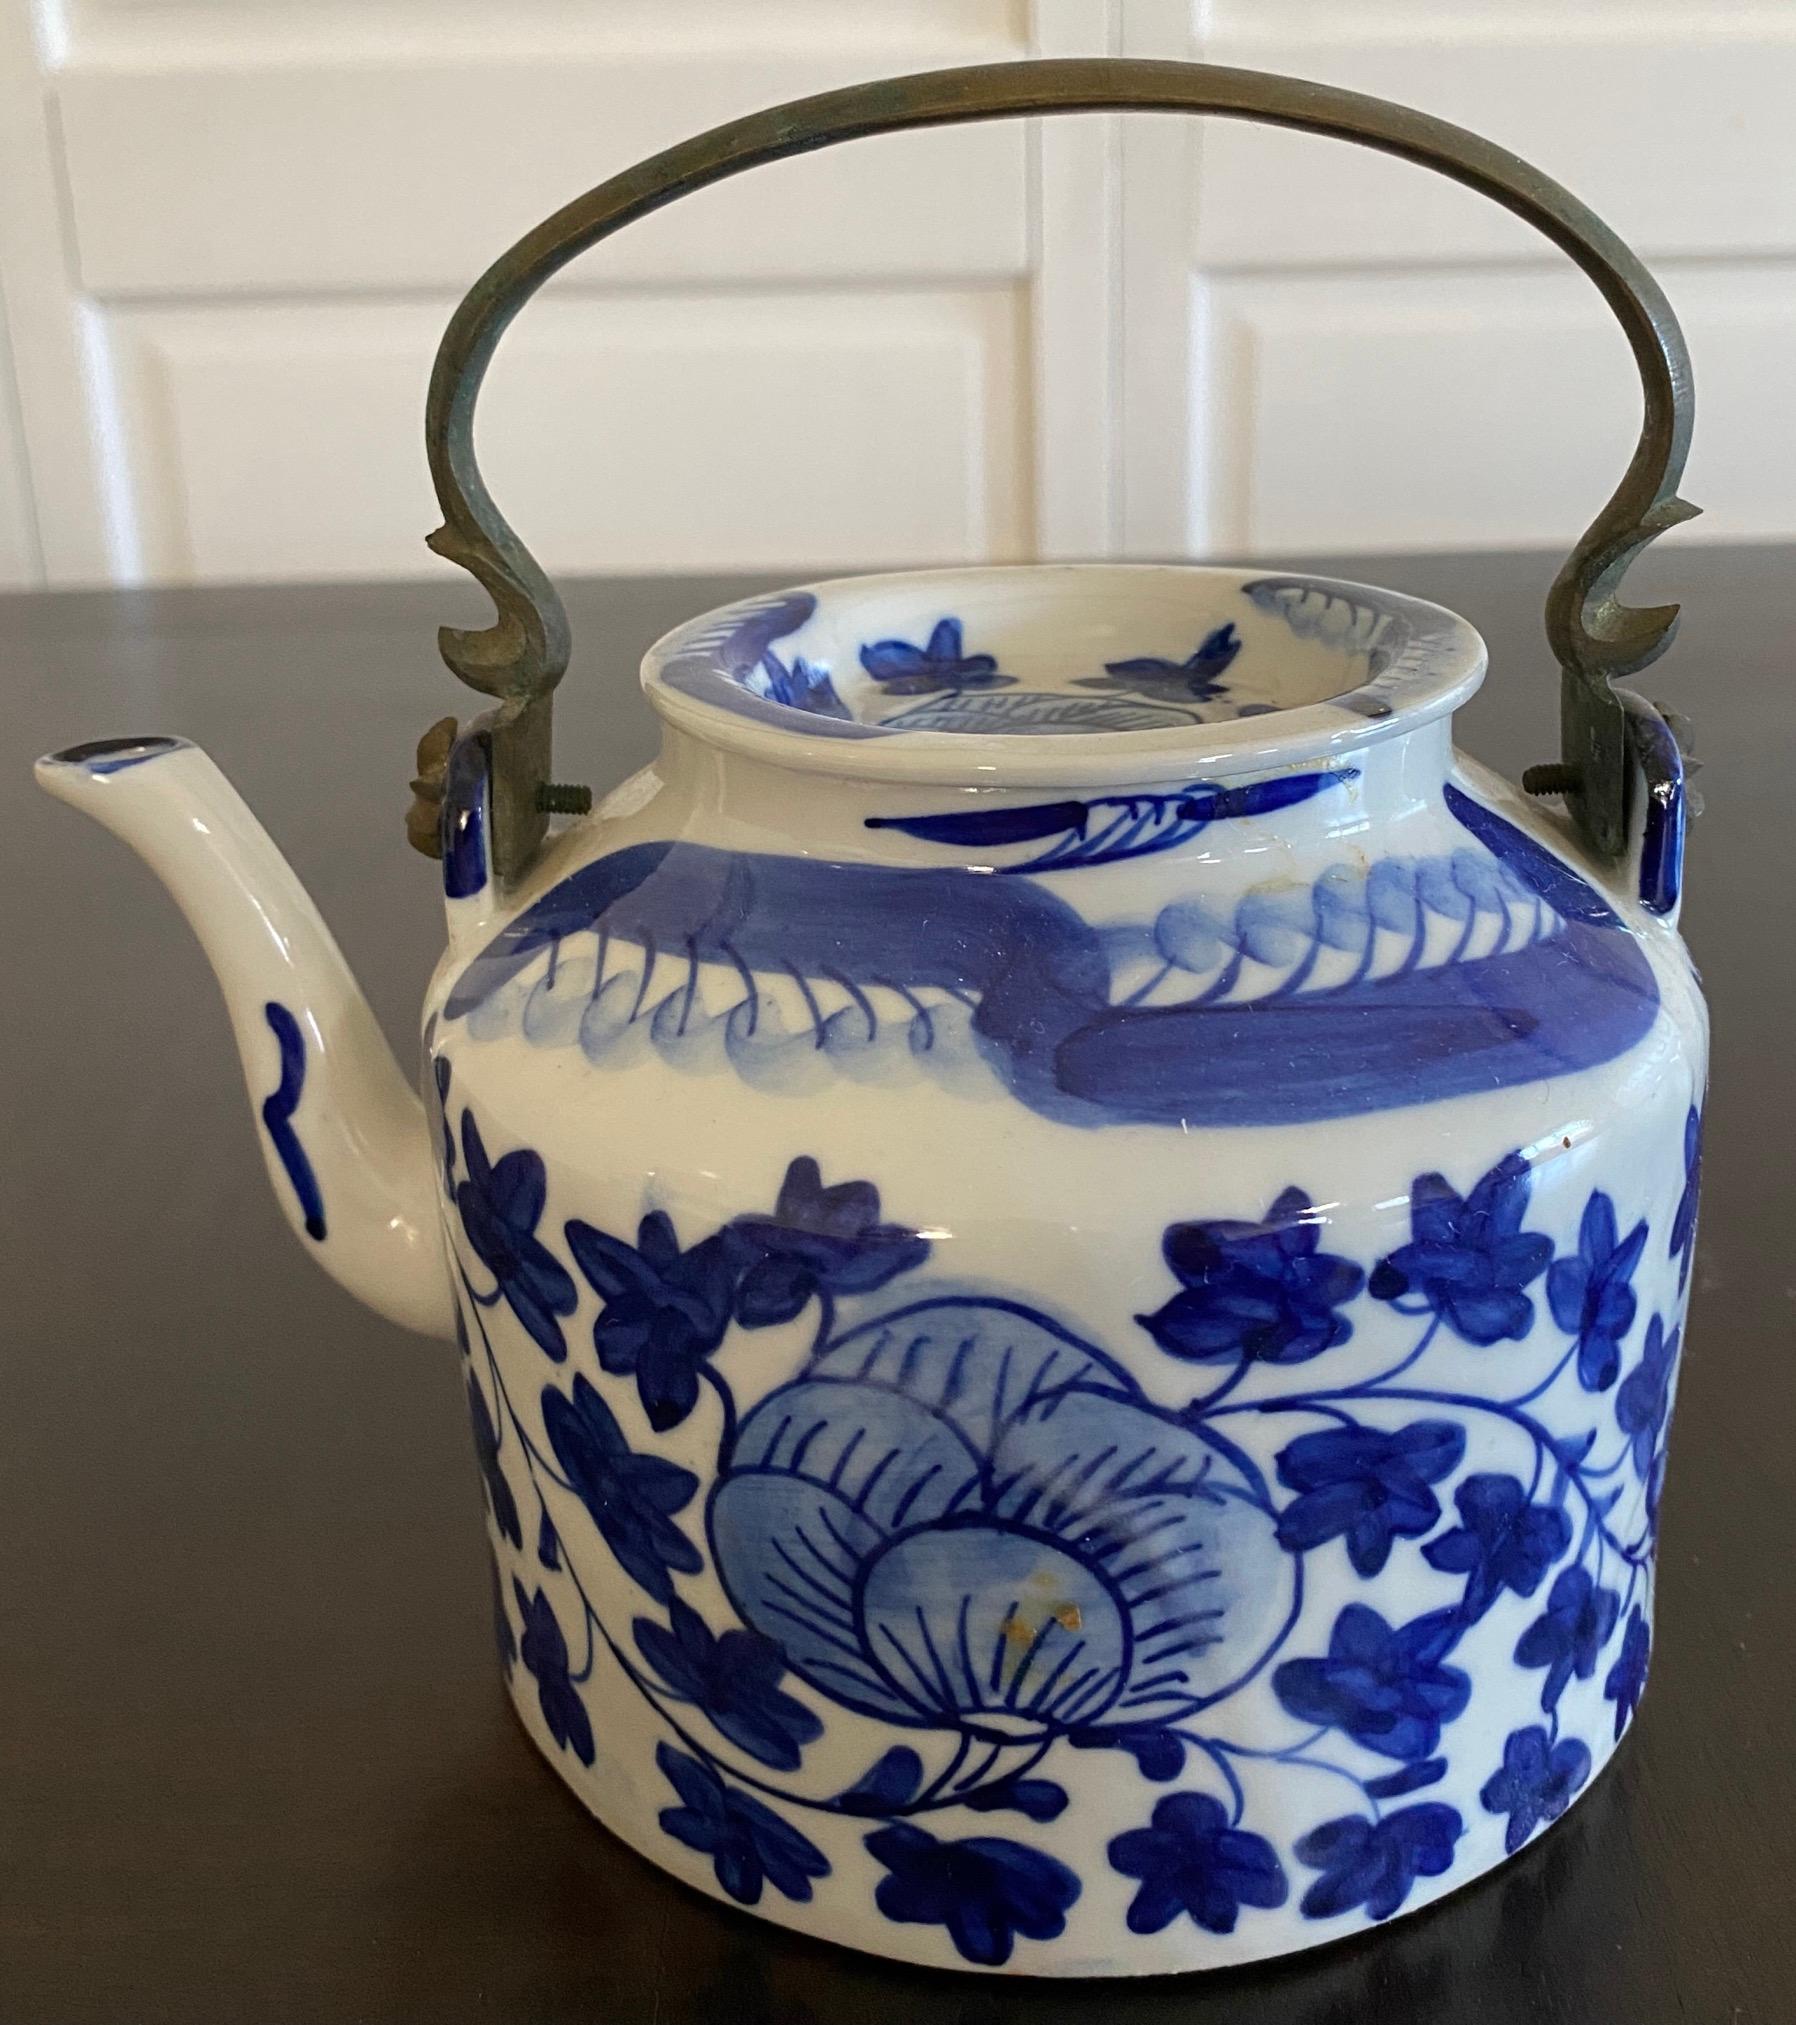 Collection of 3 Chinese Export Porcelain blue & white tea pots. Treat yourself to a cup of tea or serve a guest with individual teapot or use them as decoration or sculptural object.s
Largest tea pot measures 8 inches x 7 inches x 5 inches.
The